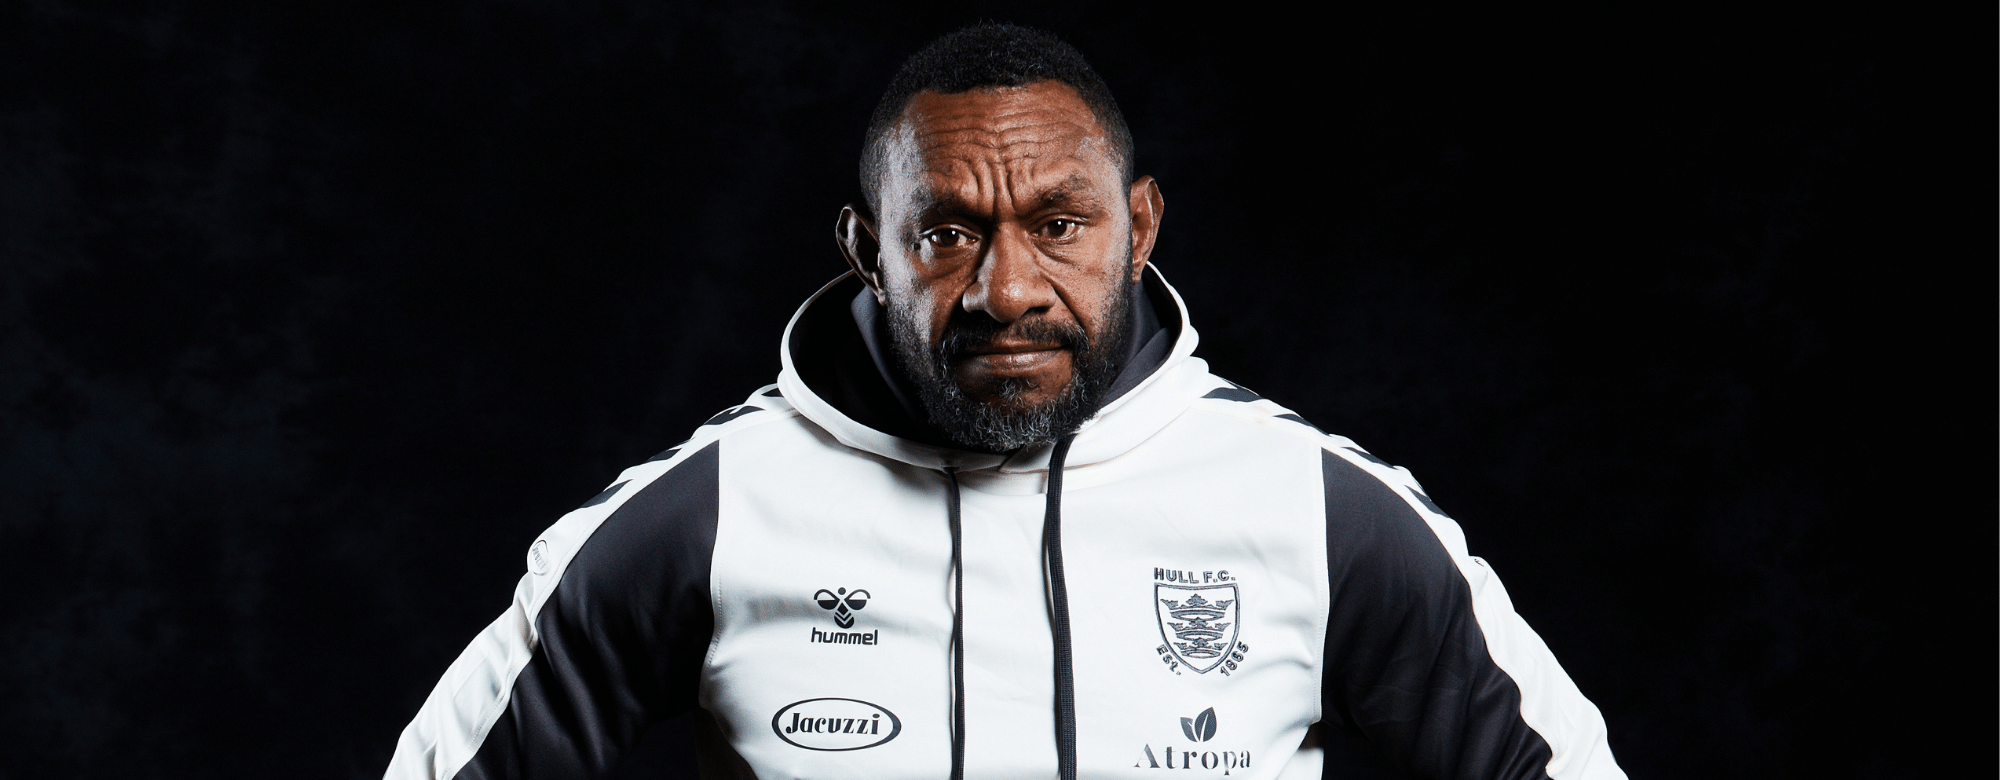 Hull FC Confirm Coaching Appointments